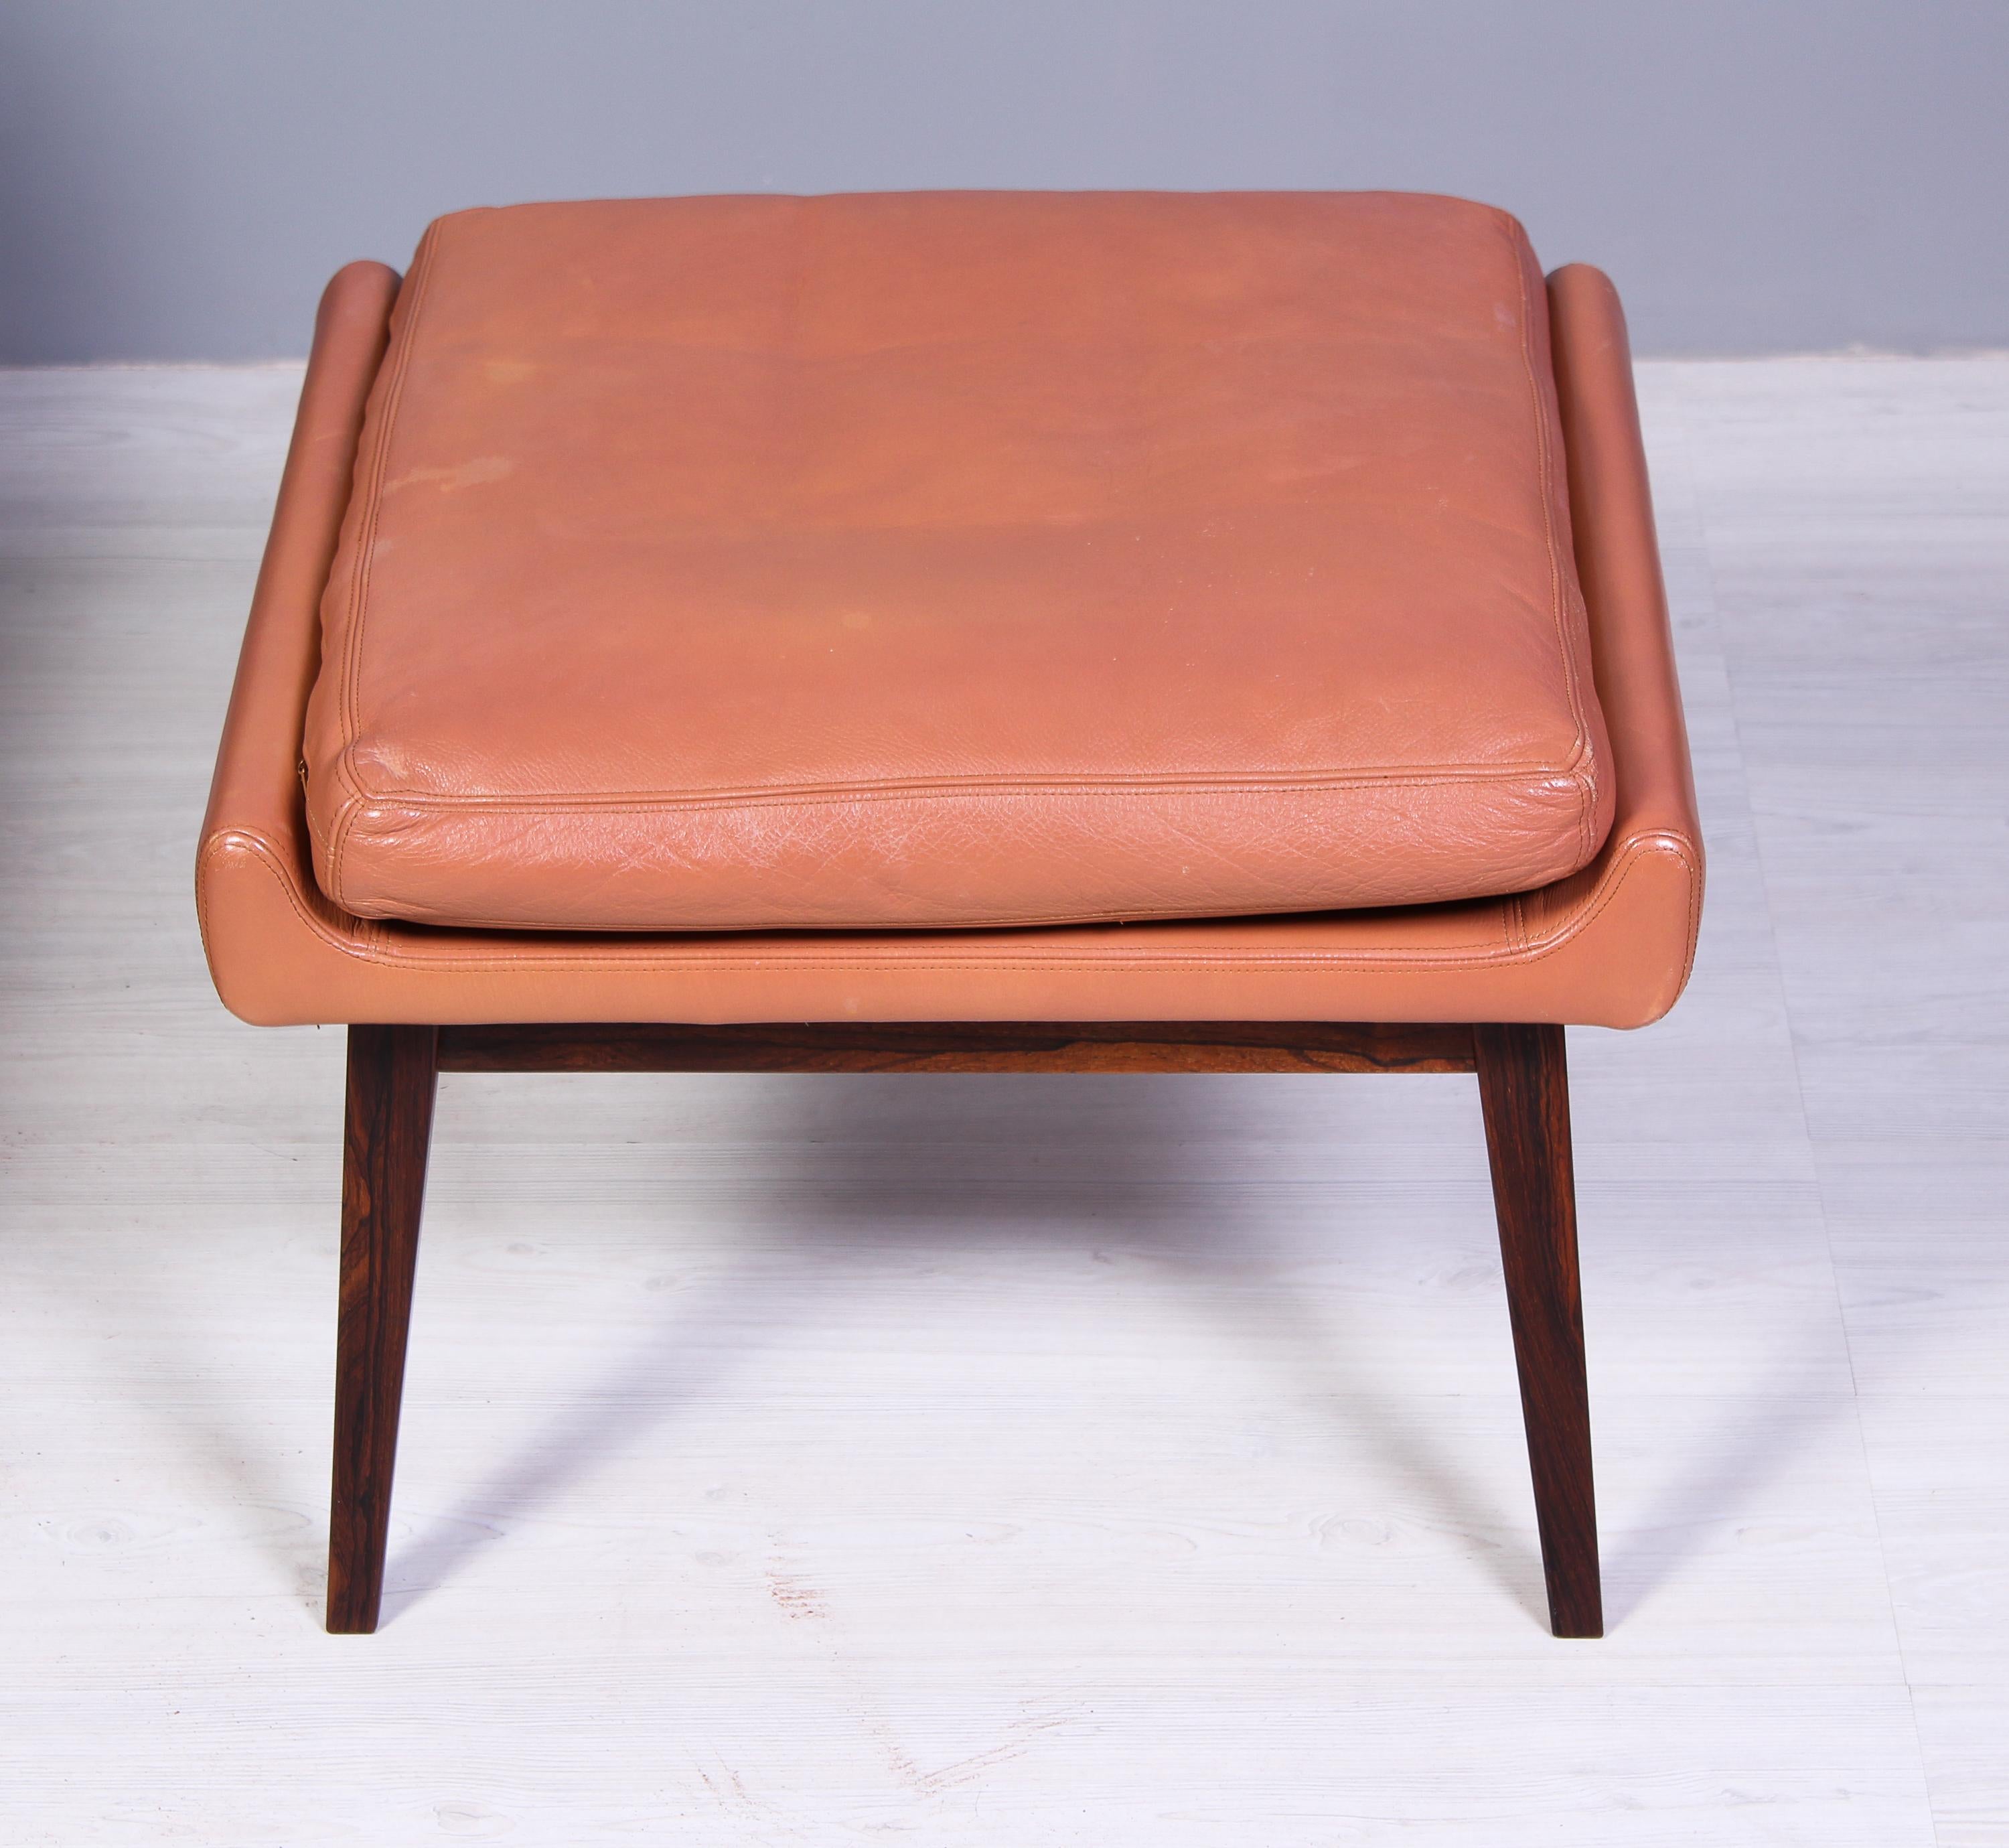 Leather & Rosewood Lounge Chairs and Ottoman by Werner Langenfled, Denmark 1960s For Sale 7